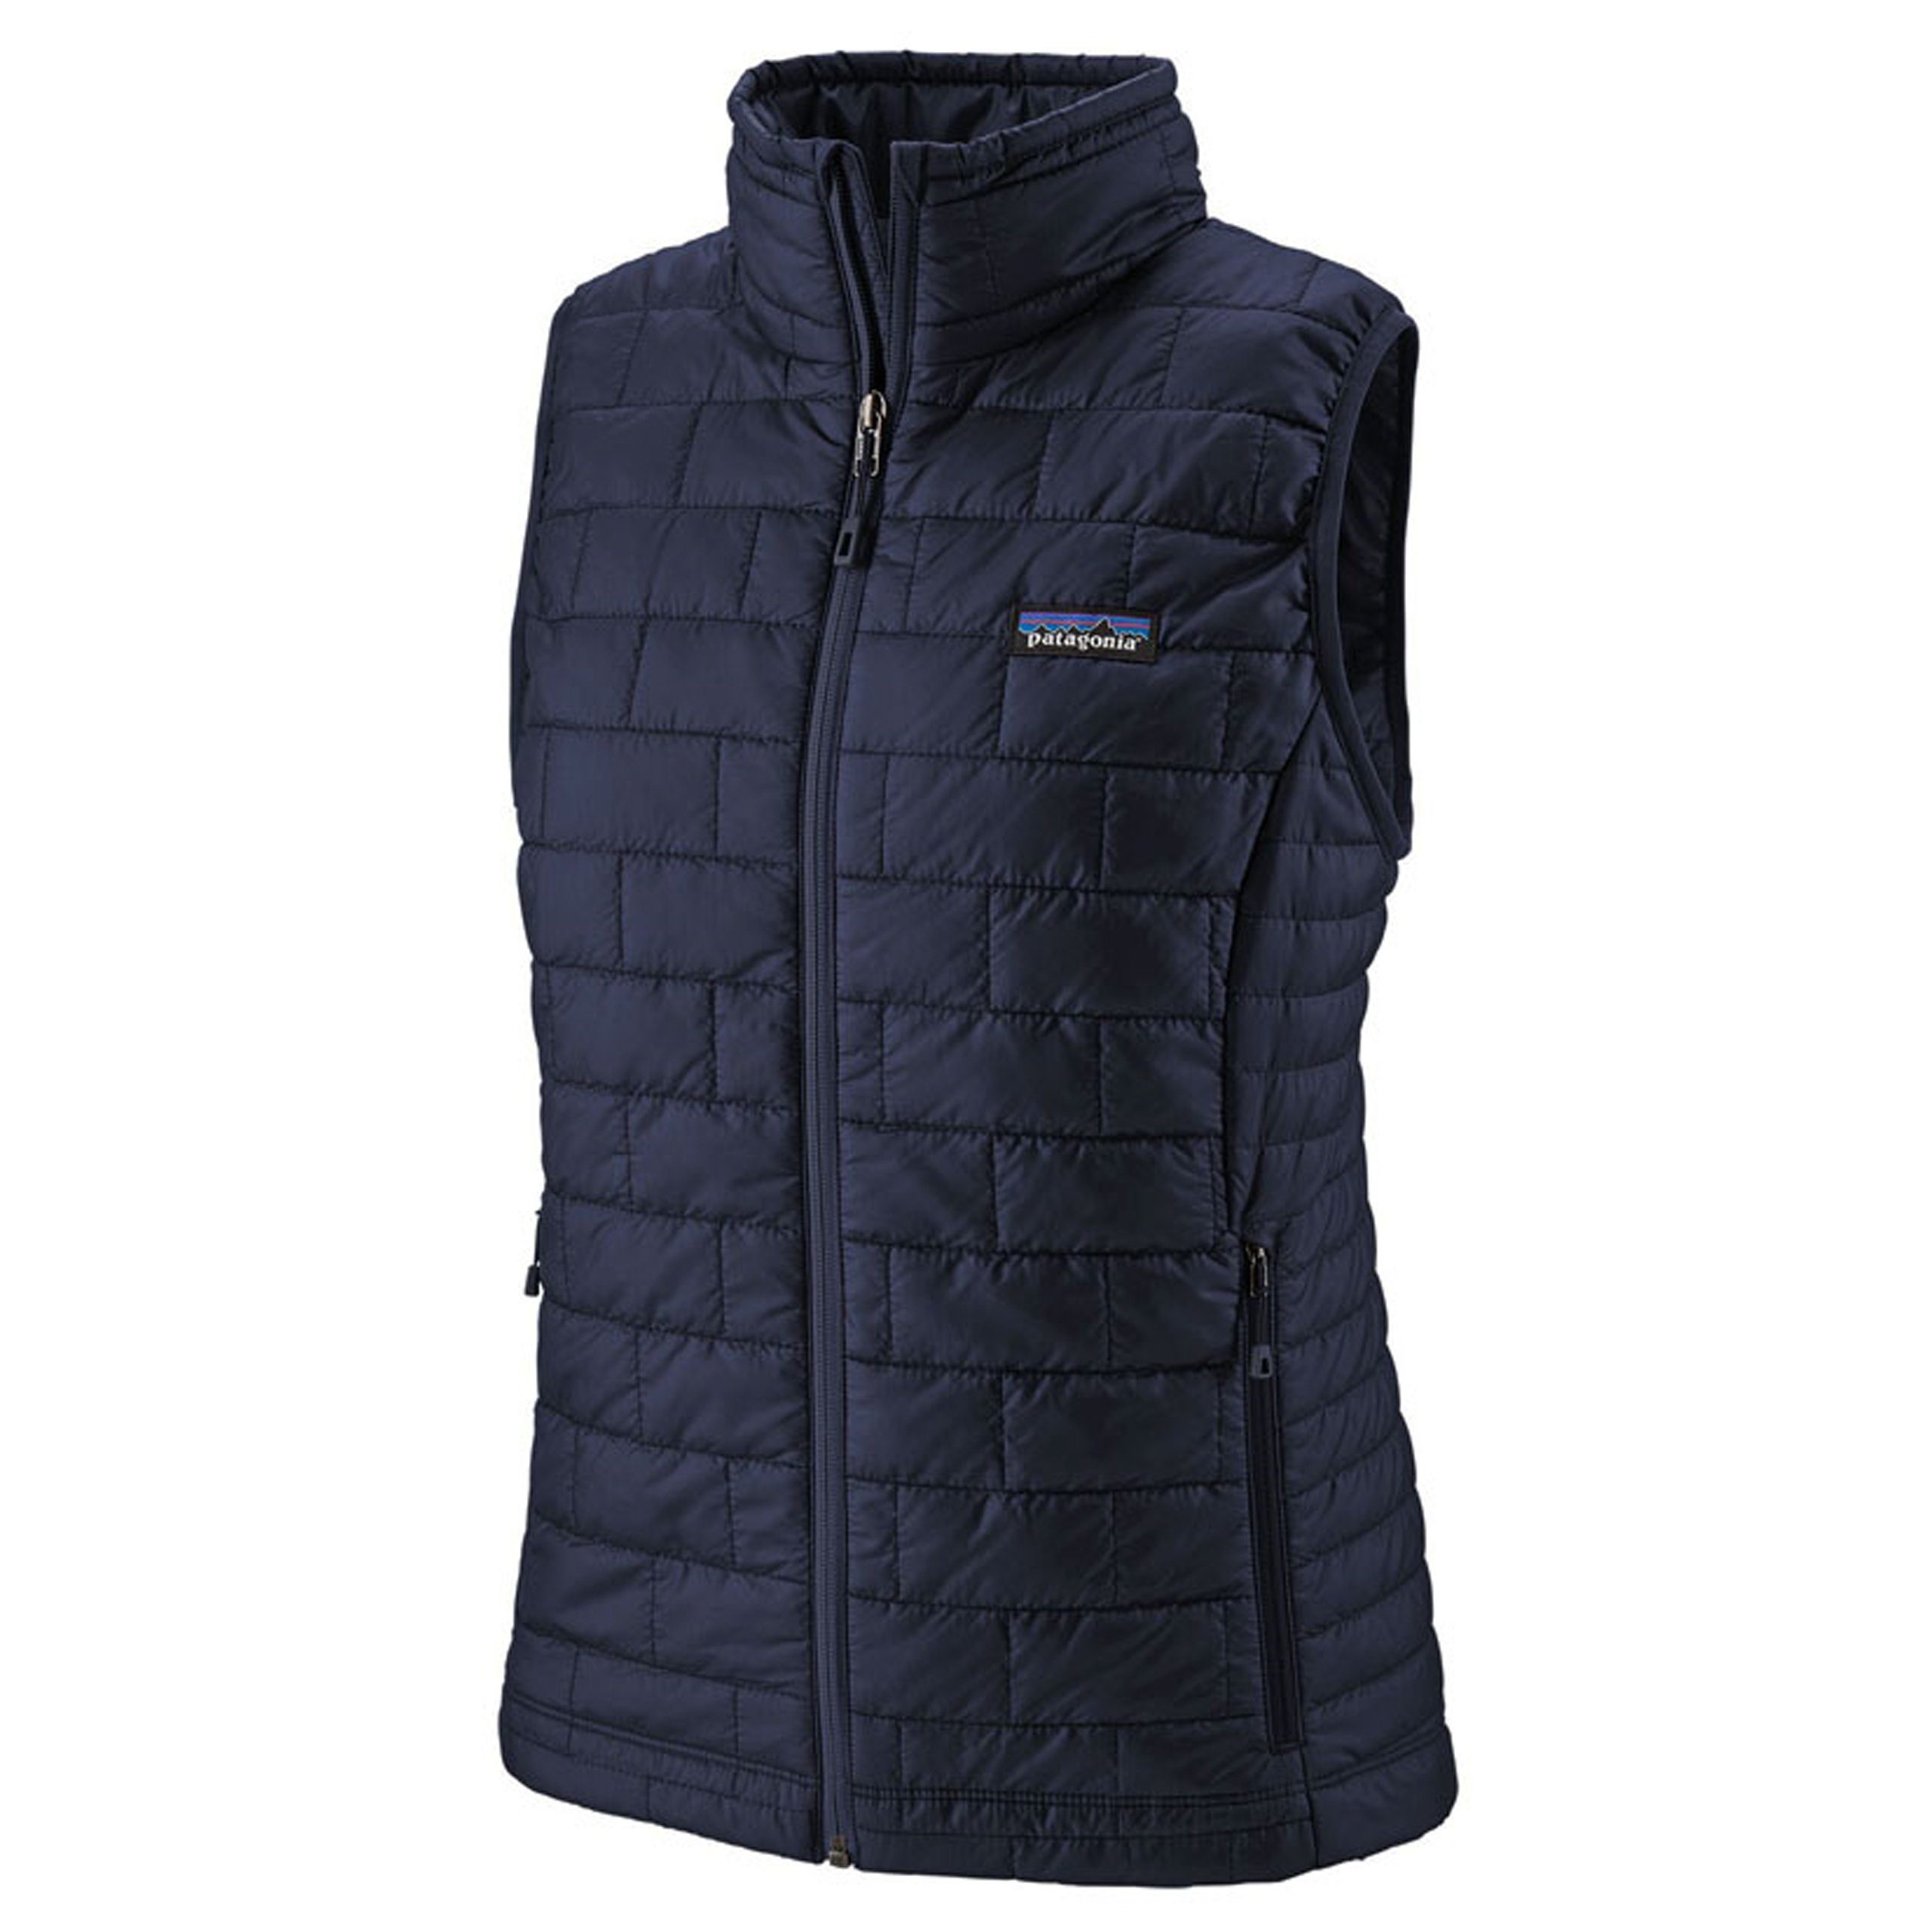 Patagonia Funktionsweste Patagonia Thermoweste Womens classicnavy ultraleichte Damen Nano Puff - Vest